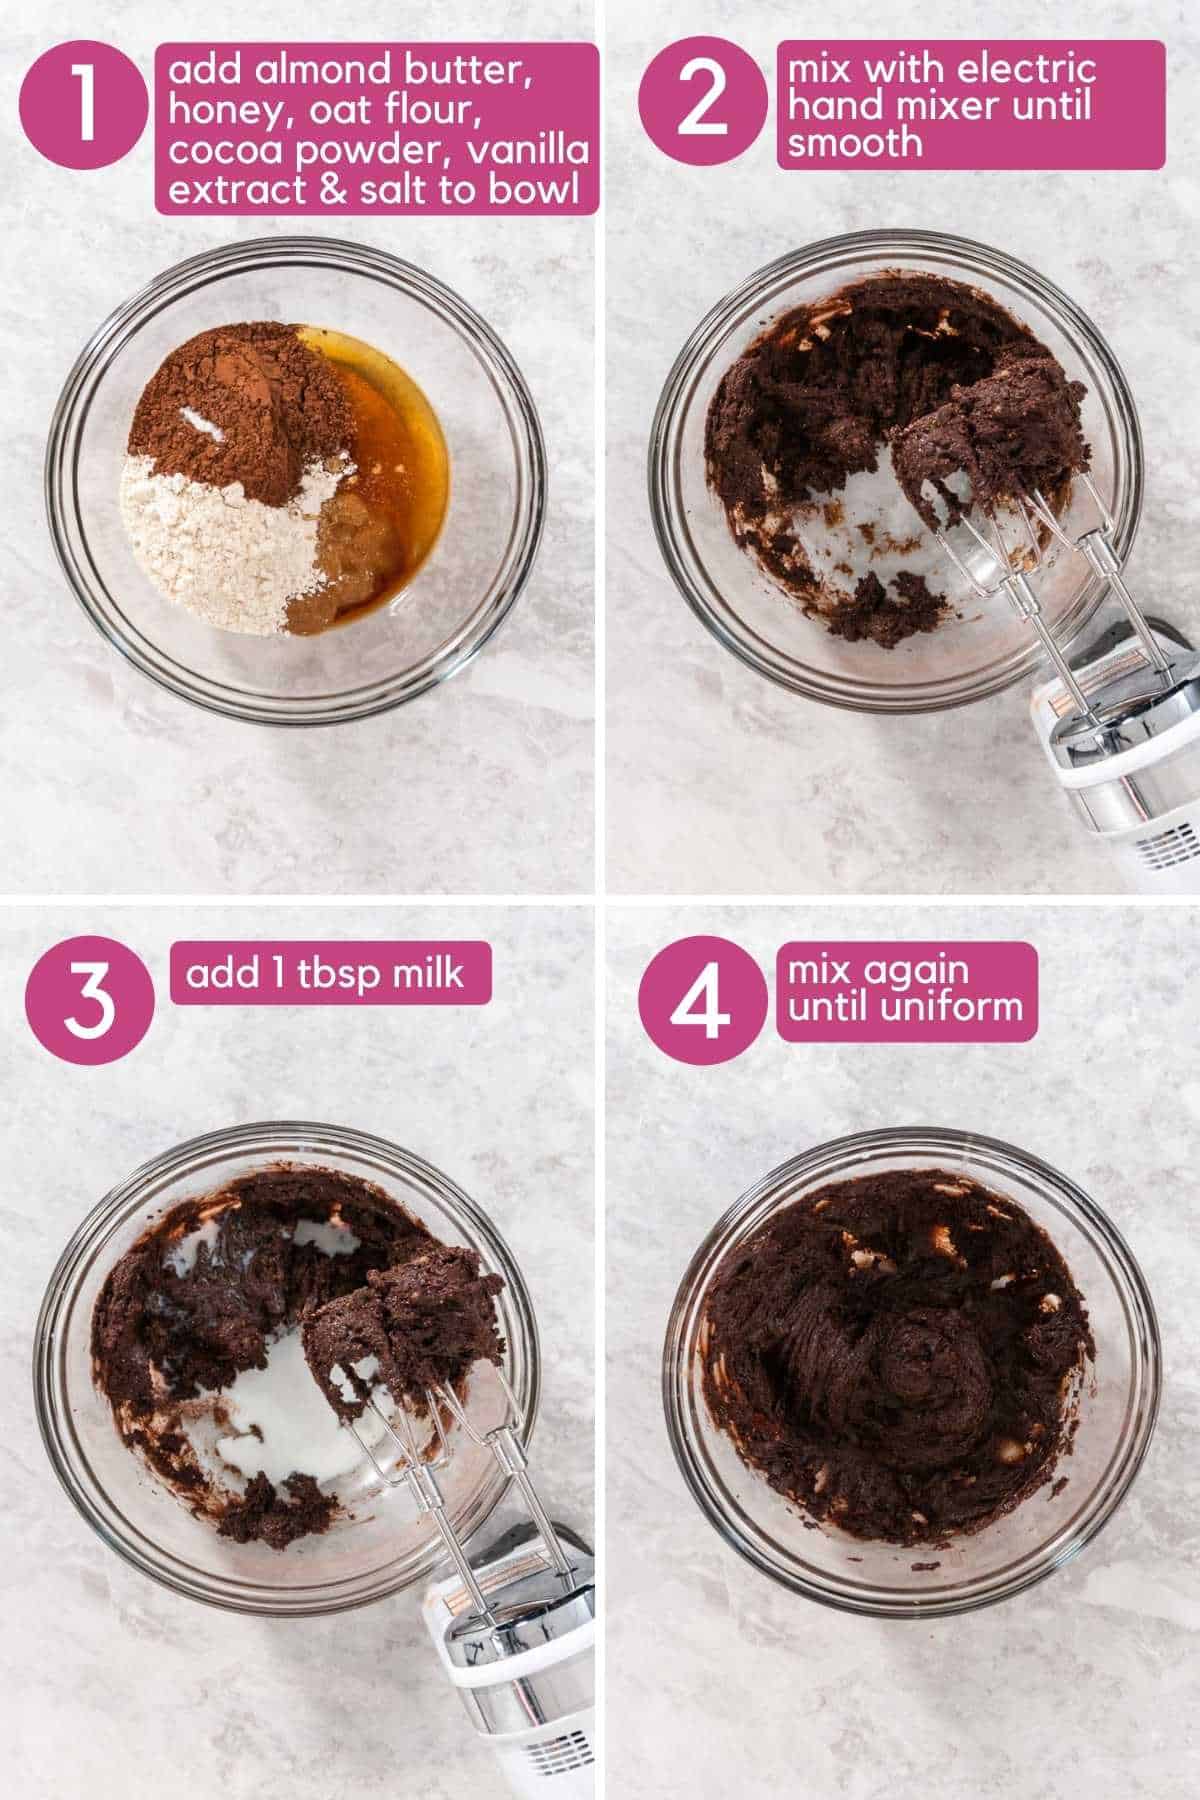 edible brownie batter add ingredients and mix with hand mixer.